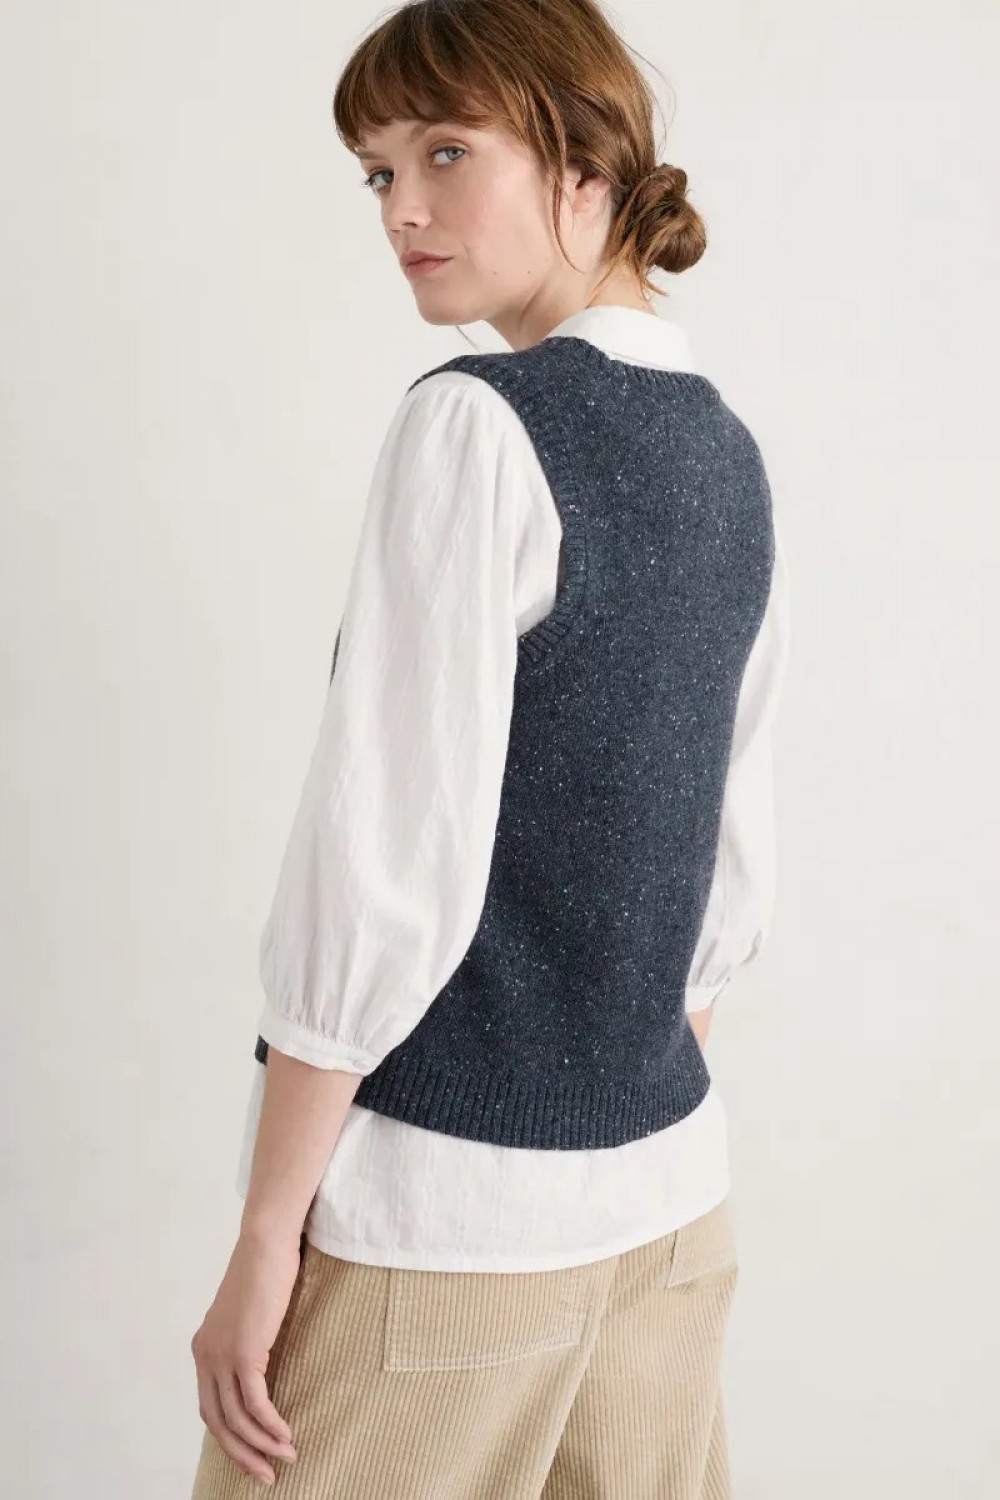 Seasalt Clothing East View Knitted Vest Fathom